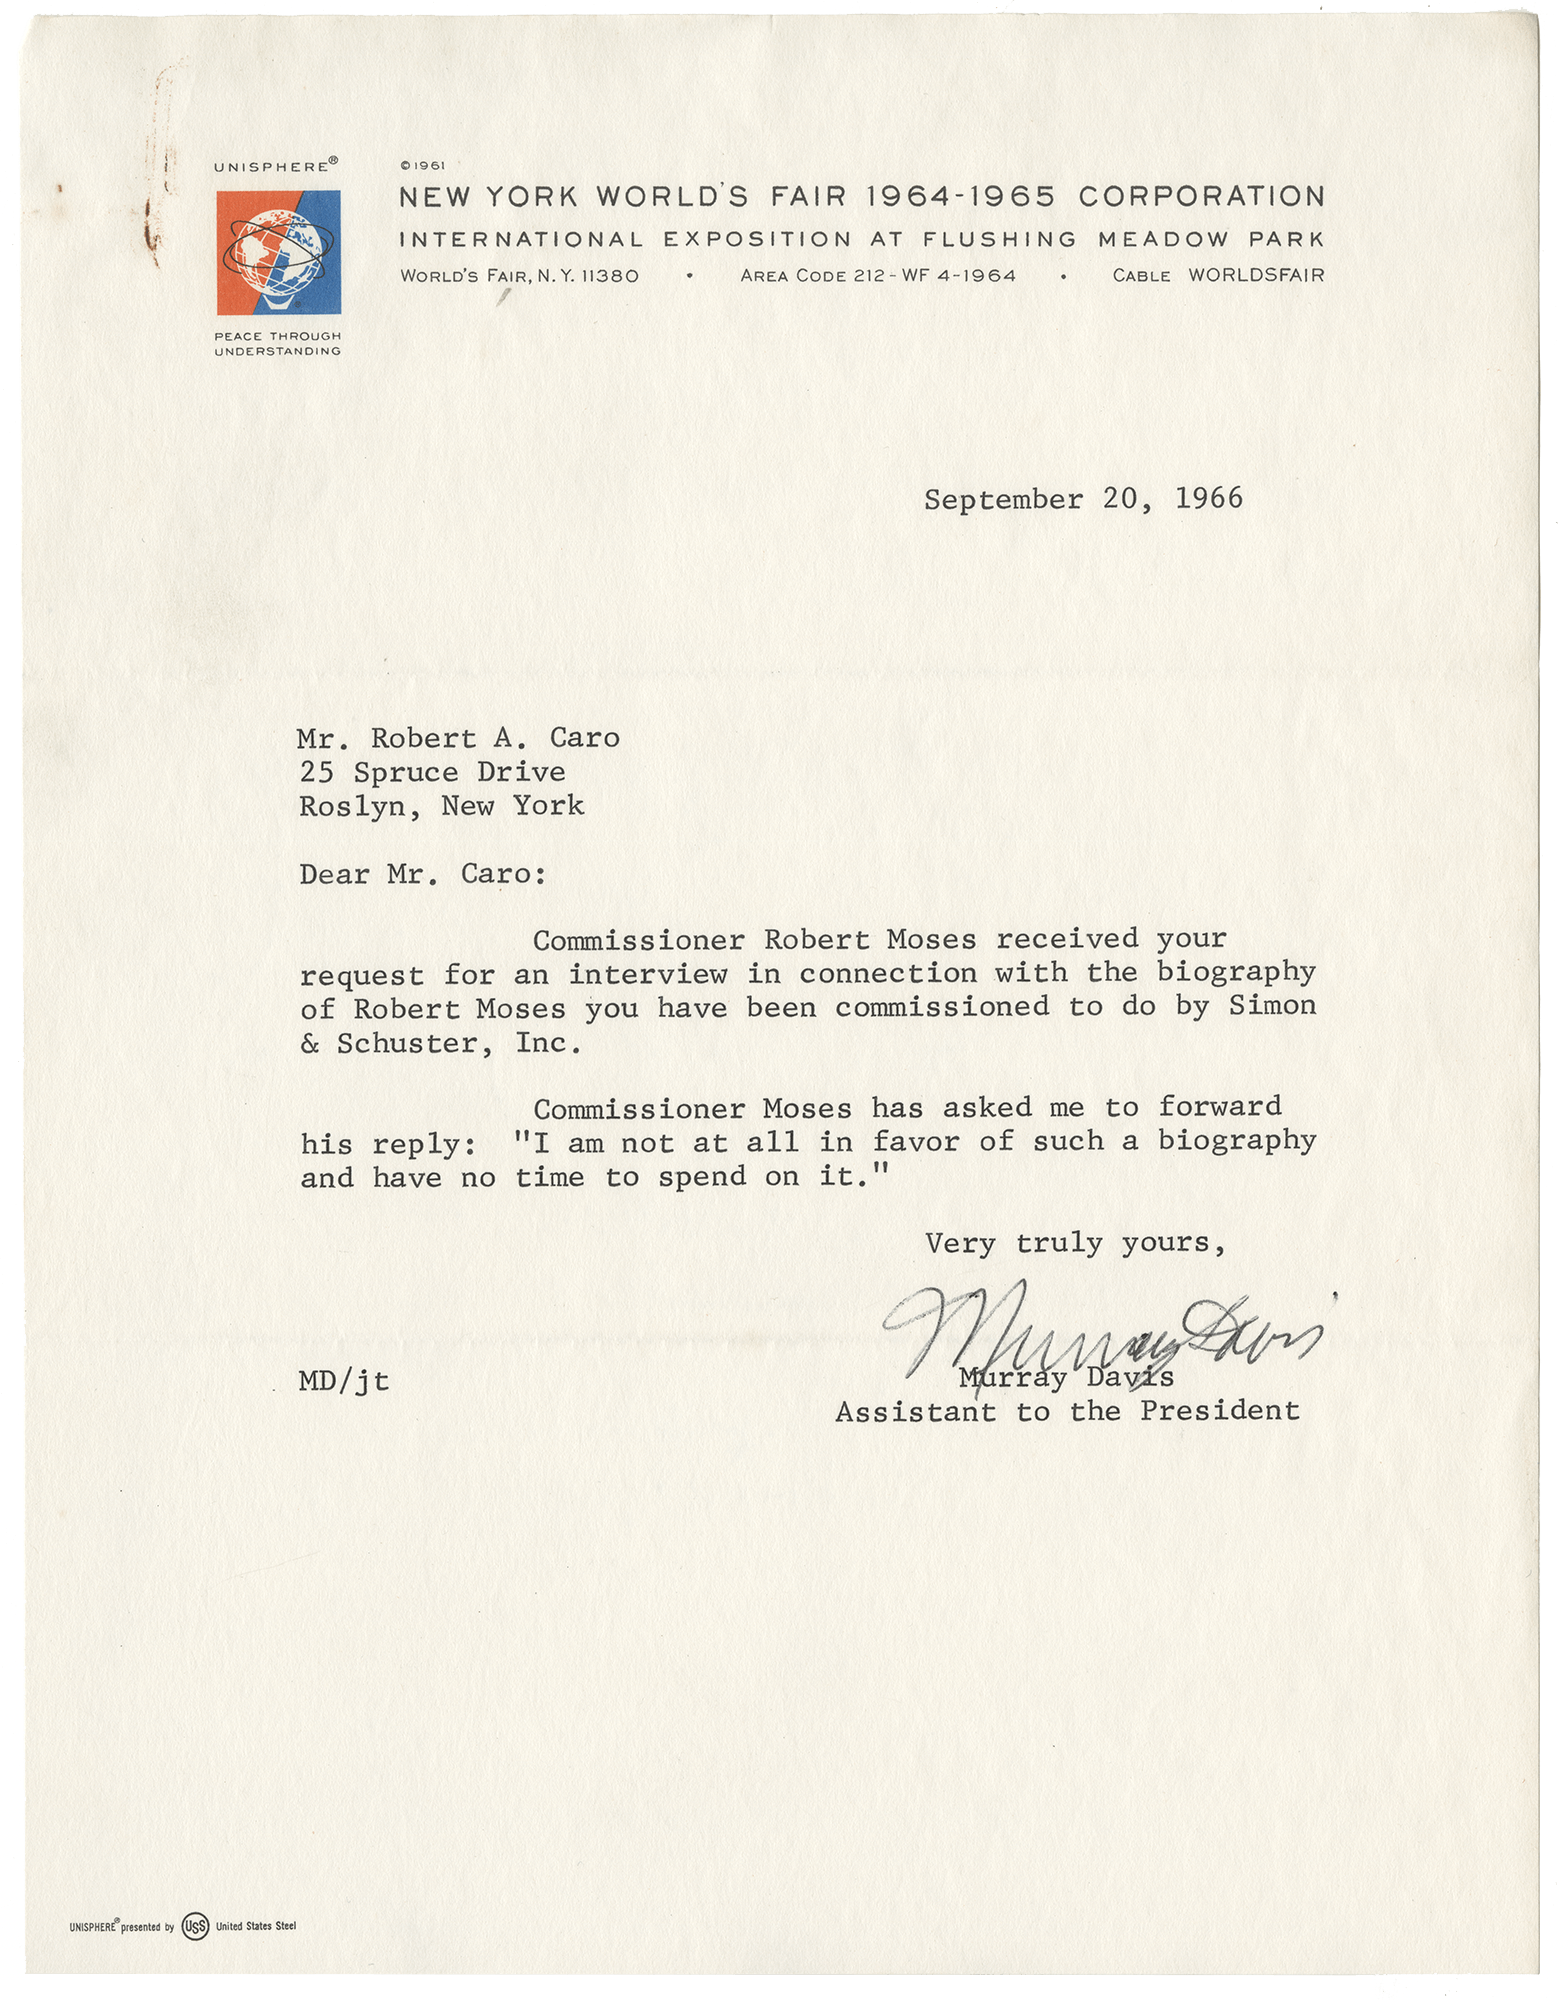 letter of robert moses declining interview request